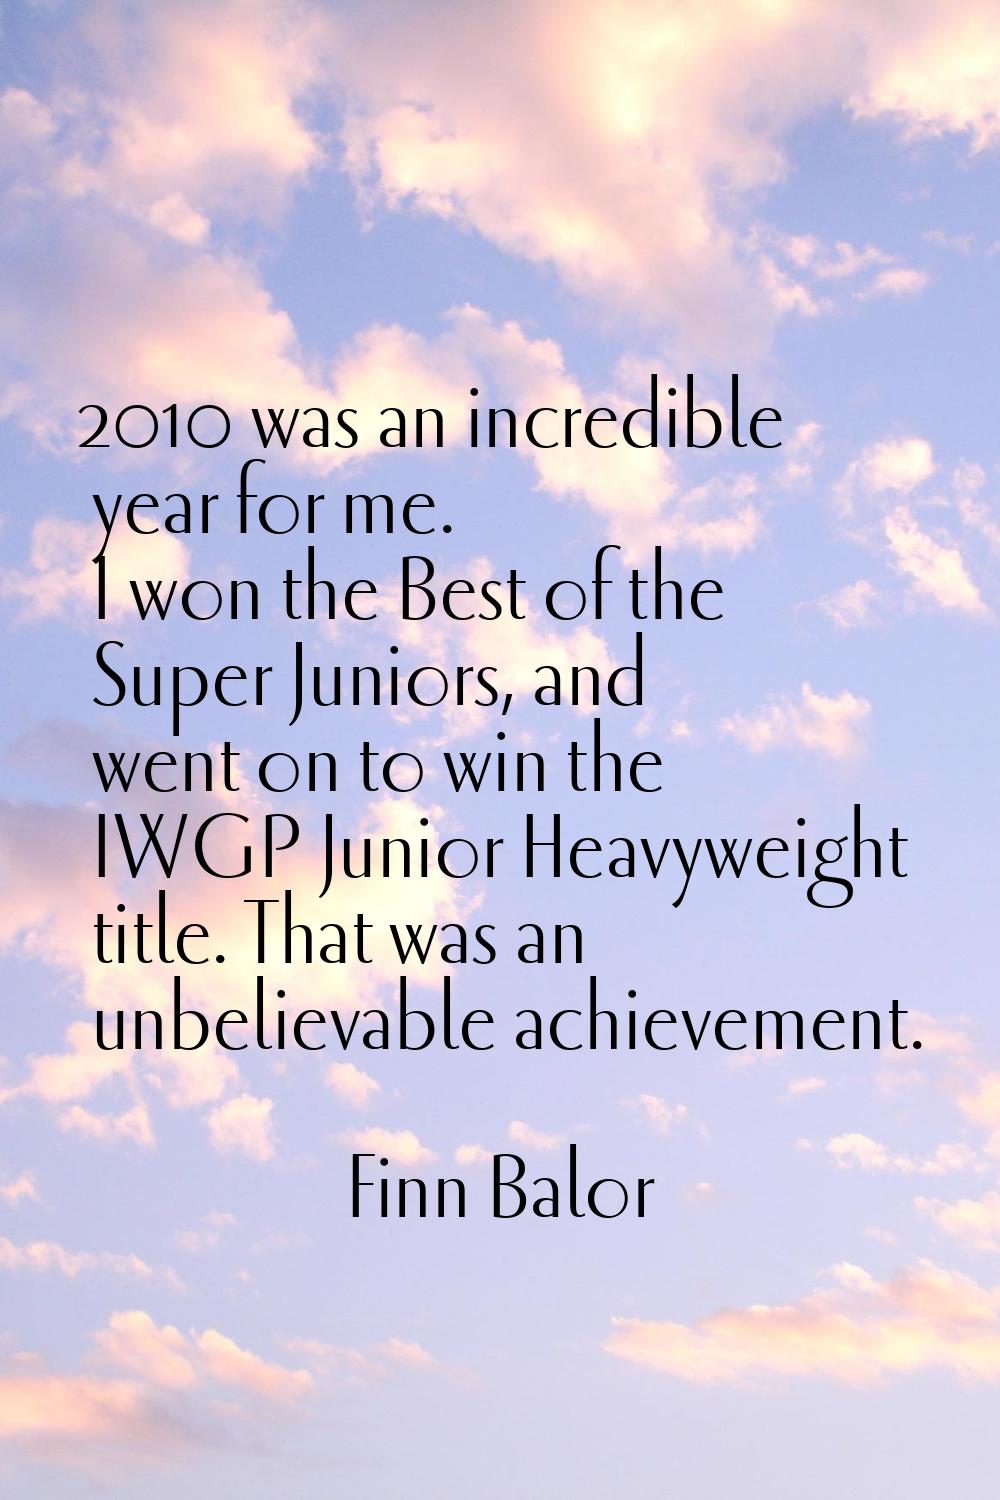 2010 was an incredible year for me. I won the Best of the Super Juniors, and went on to win the IWG